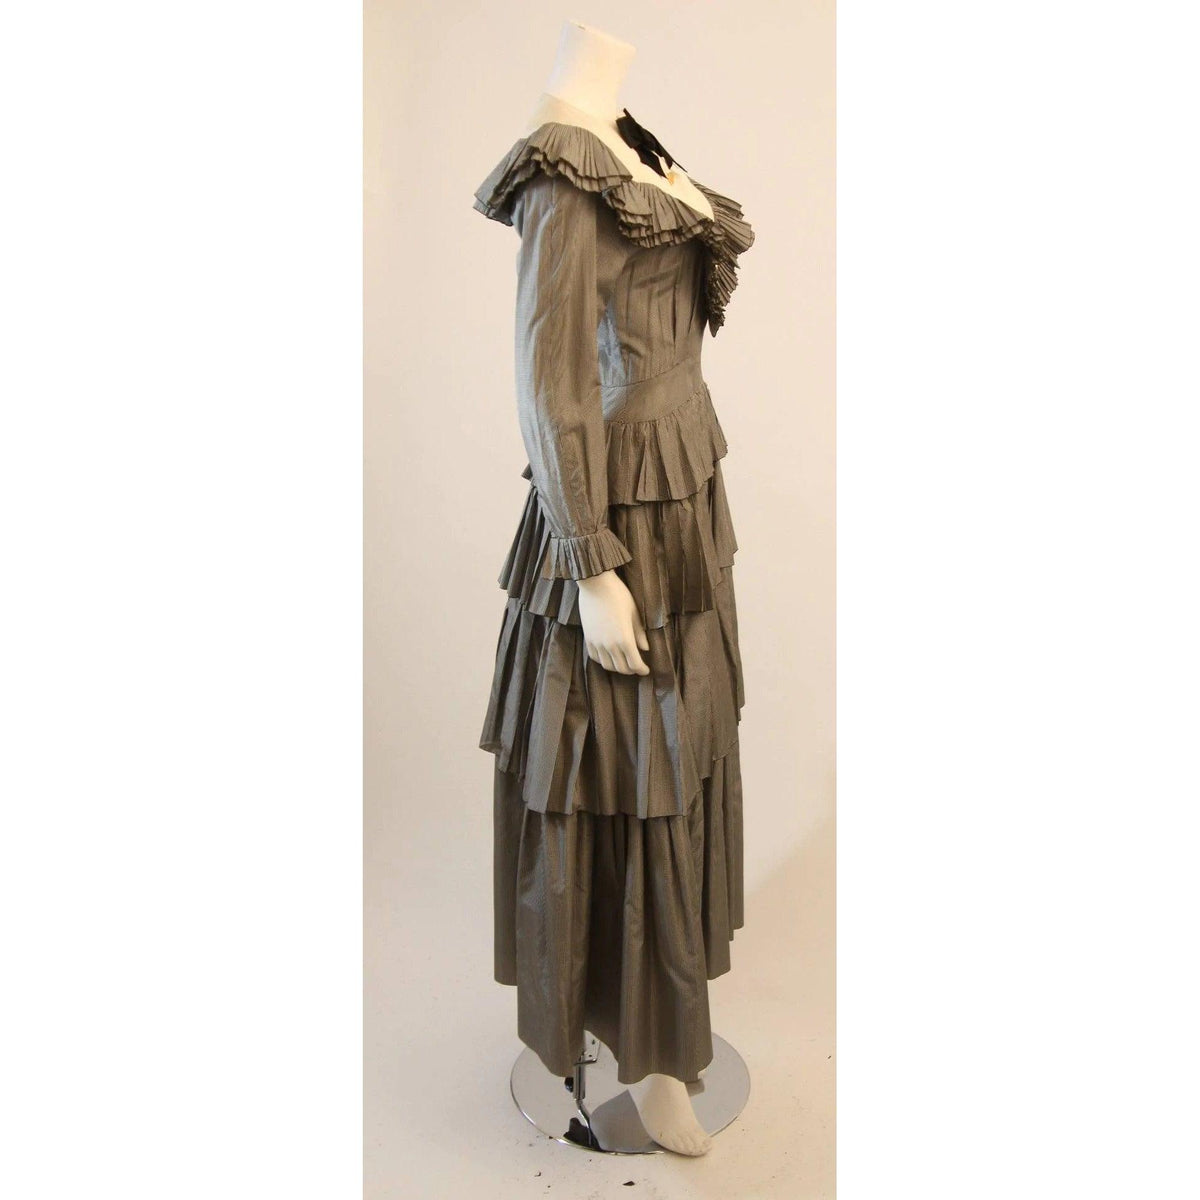 Pre-Owned CHANEL Edwardian Tiered Ruffle Gingham Gown with Black Bow | Size XS - theREMODA